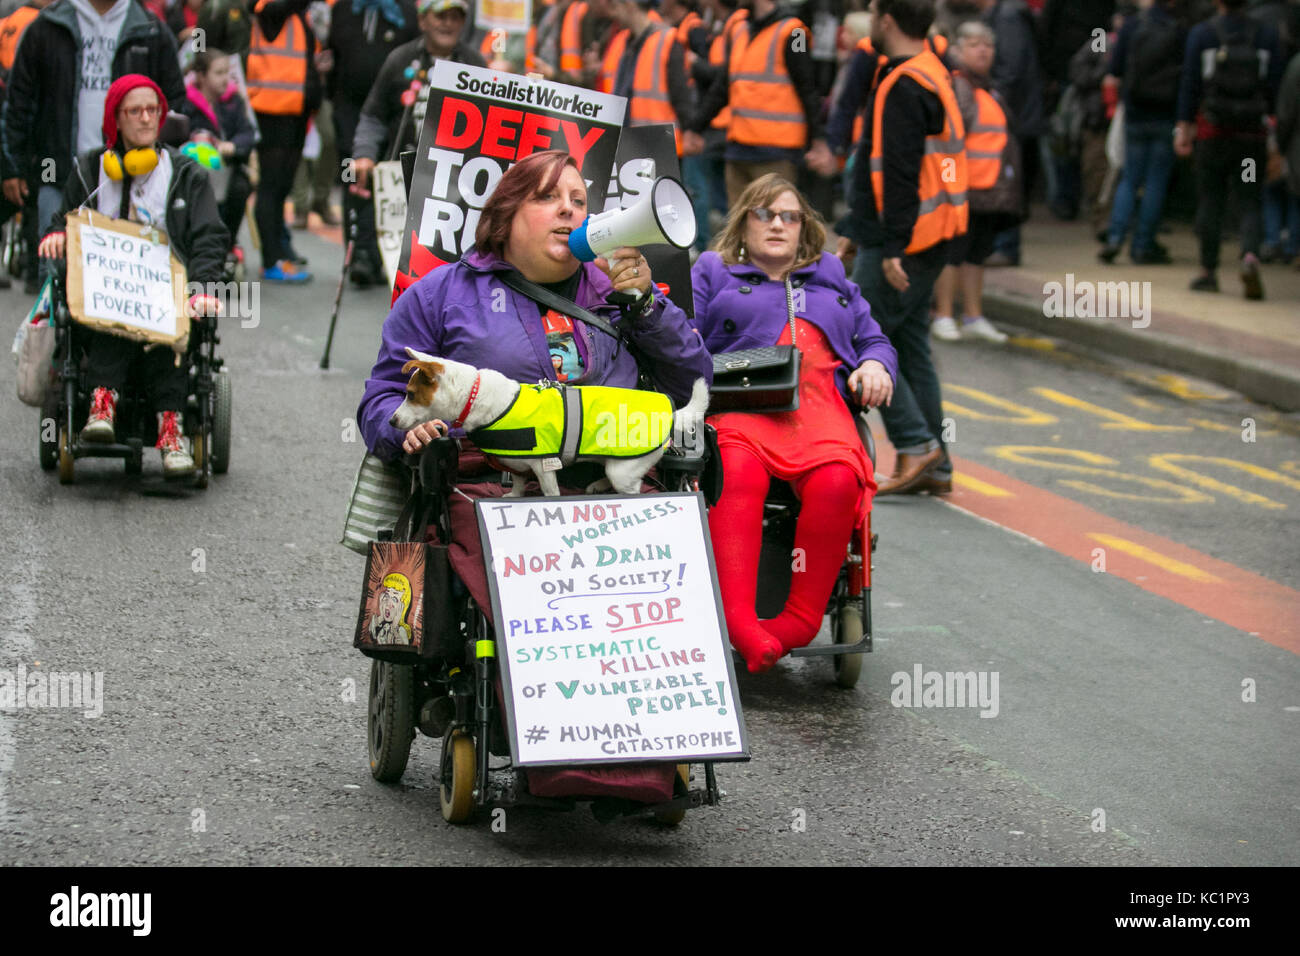 Disabled protestors in powered wheelchairs in Manchester, UK. October, 2017. Thousands of demonstrators bring the streets of Manchester to a standstill as protestors take part in a massive 'Tories Out' protest to end Austerity measures.  Anti-Brexit campaigners and activists protesting the government’s austerity policies are holding rallies to coincide with the start of the Conservative Party conference being held in the city centre. Stock Photo